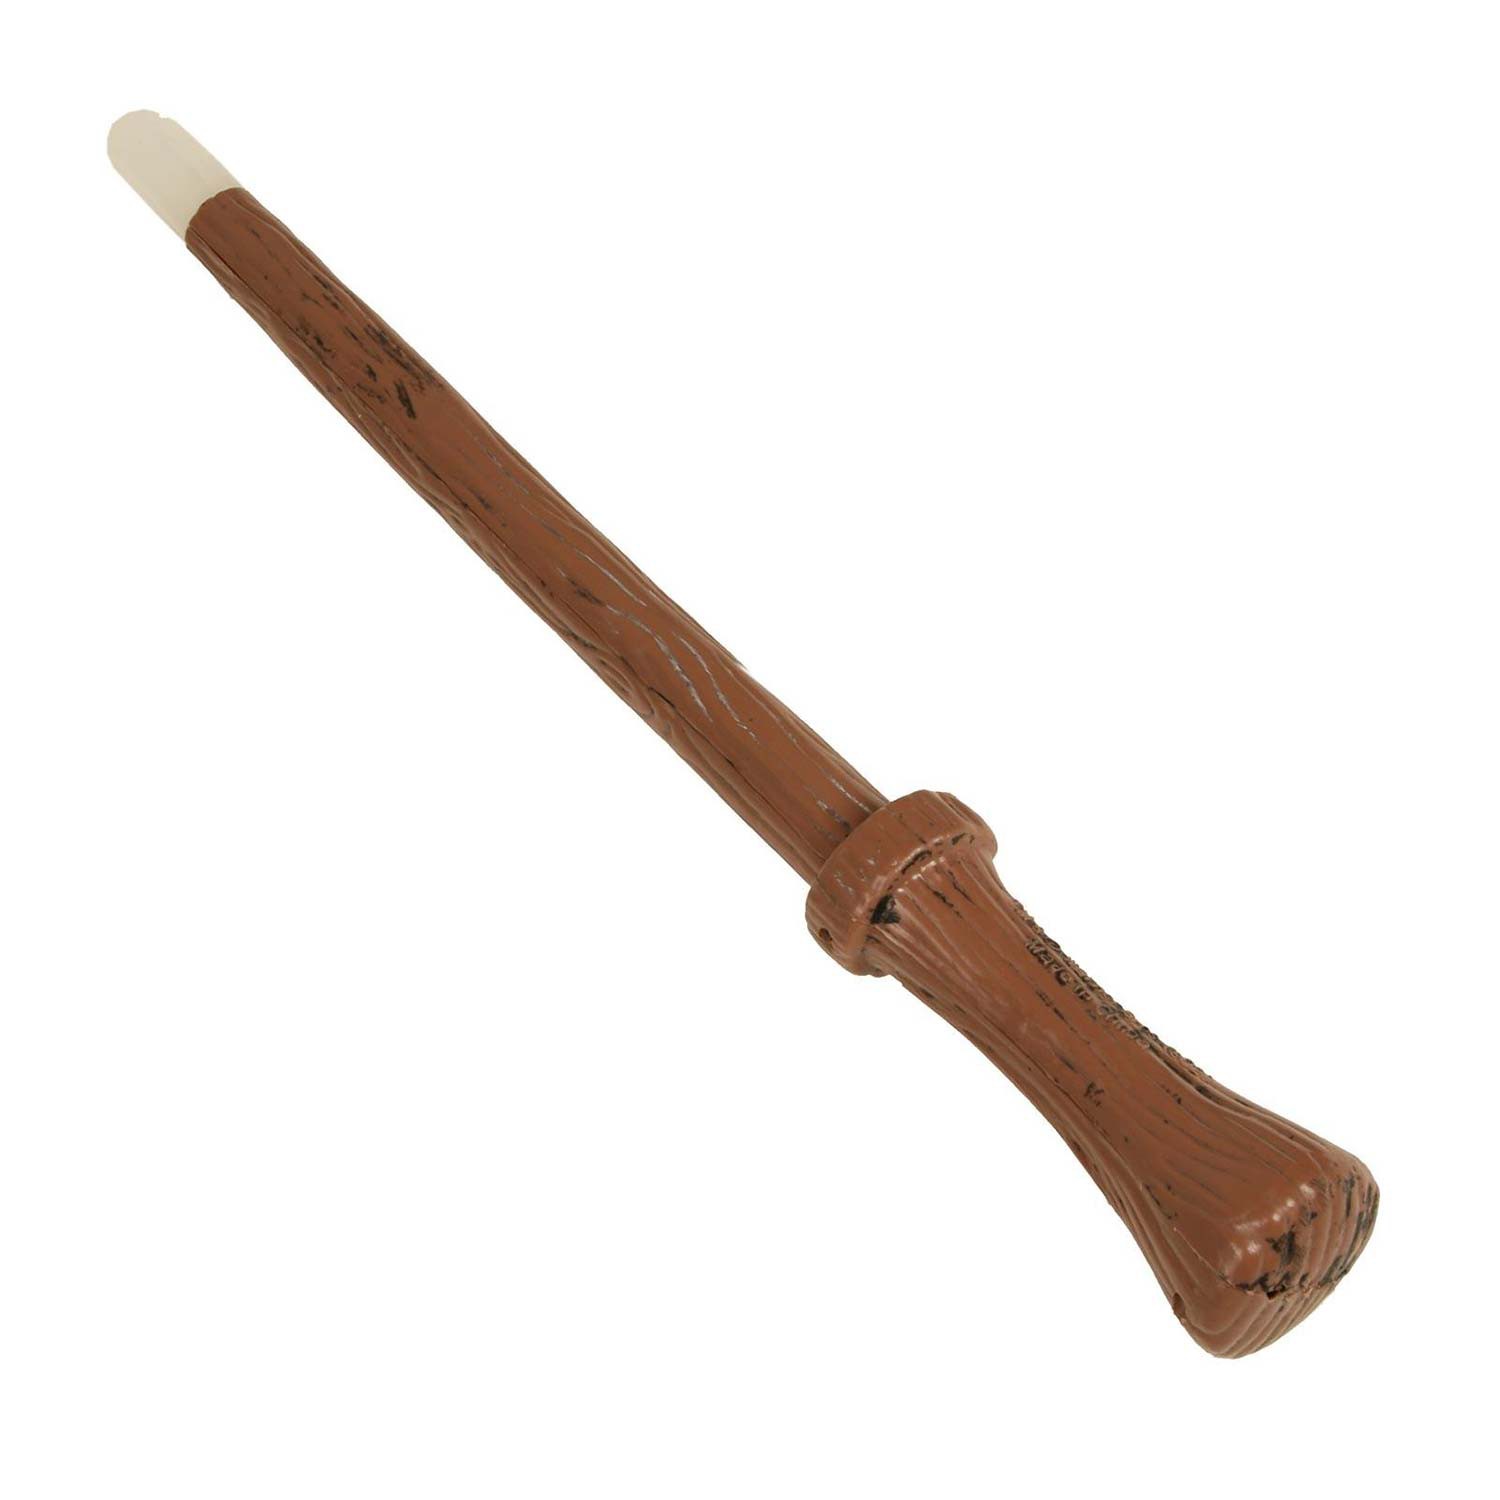 Harry Potter Deluxe Magical Wand Halloween Costume Accessory - image 1 of 2